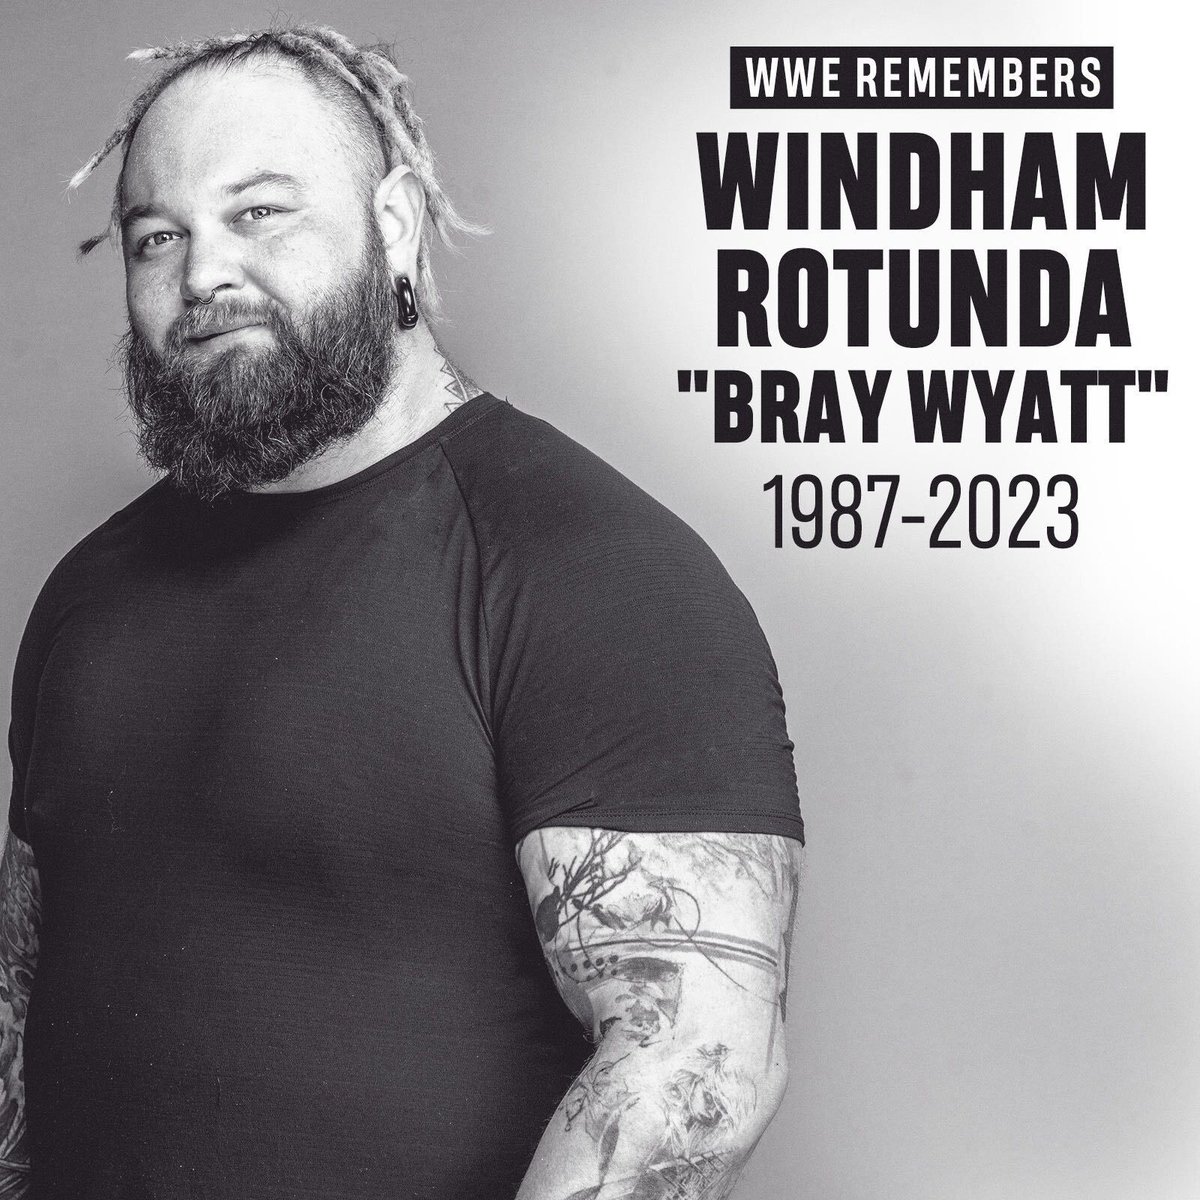 WWE is saddened to learn that Windham Rotunda, also known as Bray Wyatt, passed away on Thursday, Aug. 24, at age 36. WWE extends its condolences to Rotunda’s family, friends and fans.